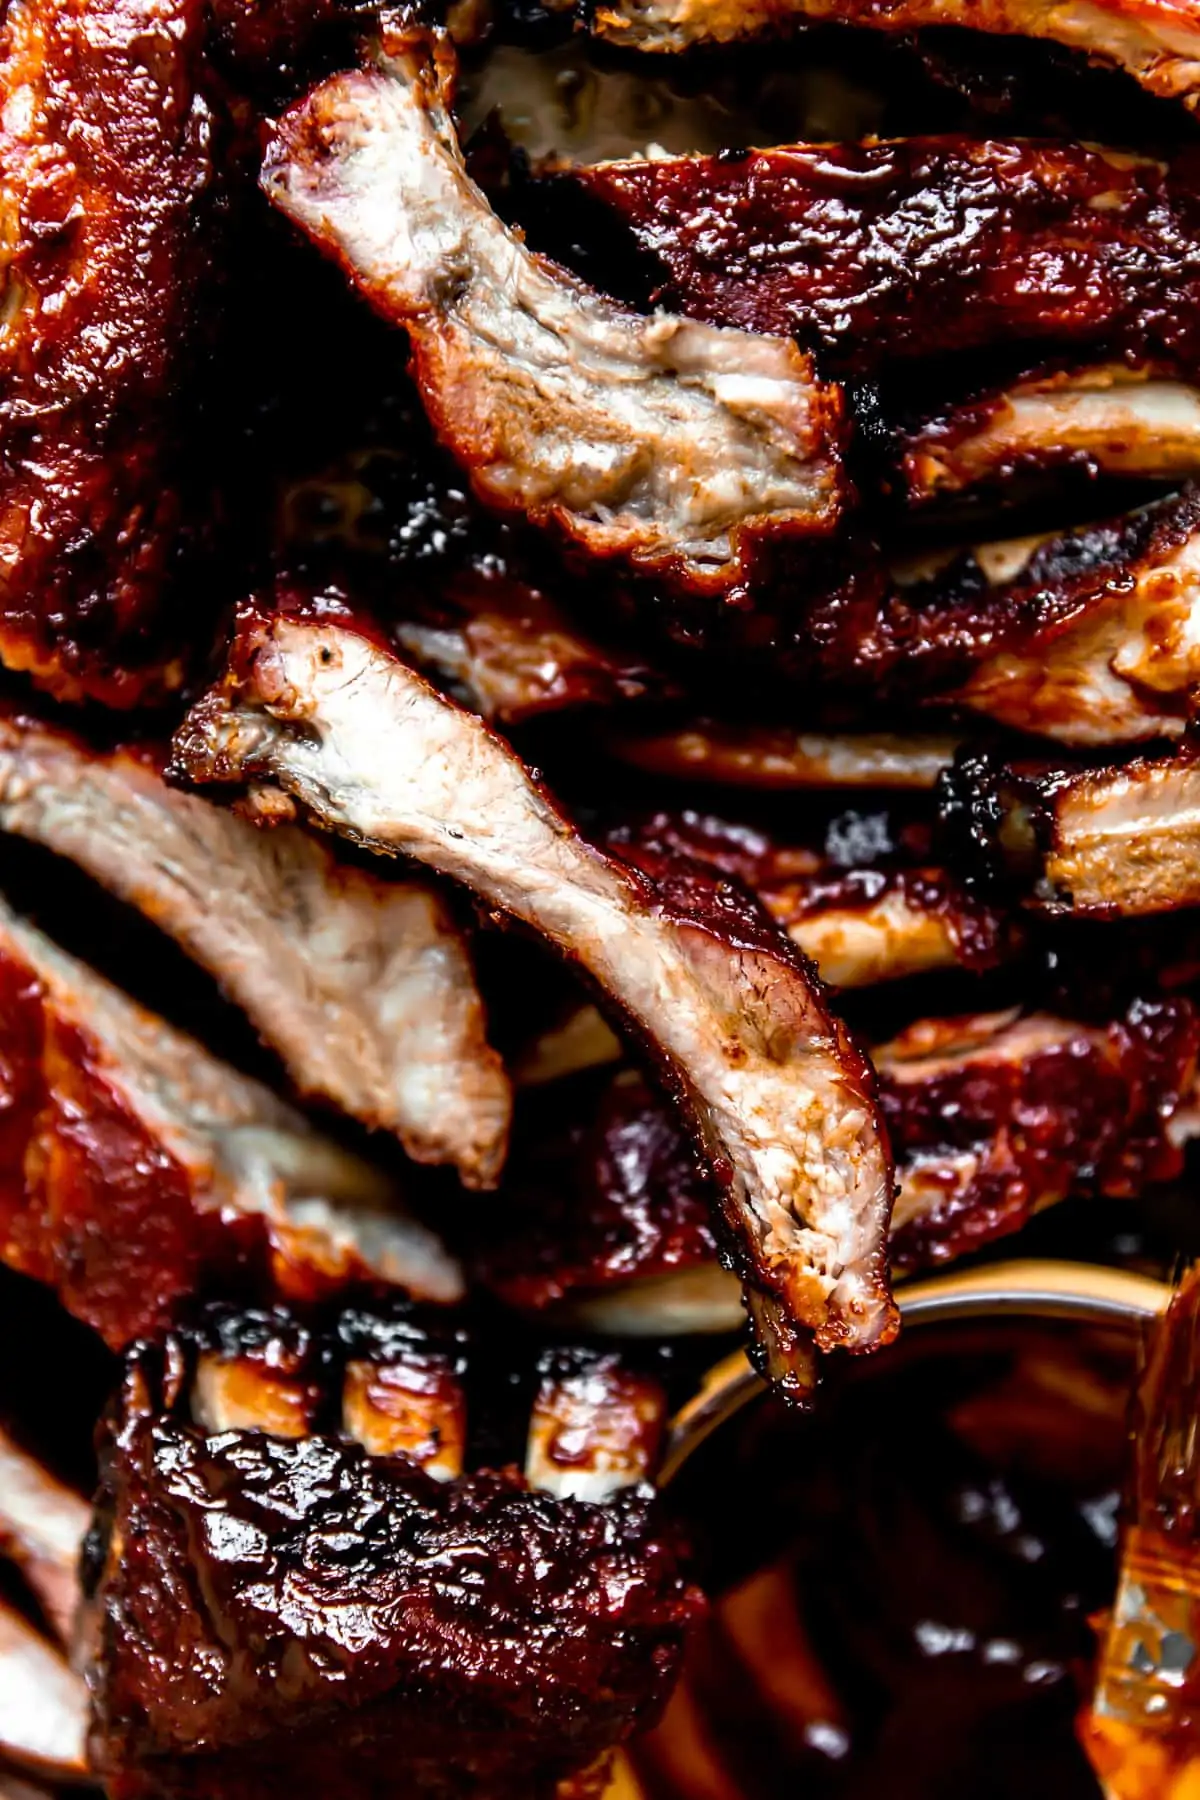 Sliced pork ribs that have been smoked all stacked and ready to serve.